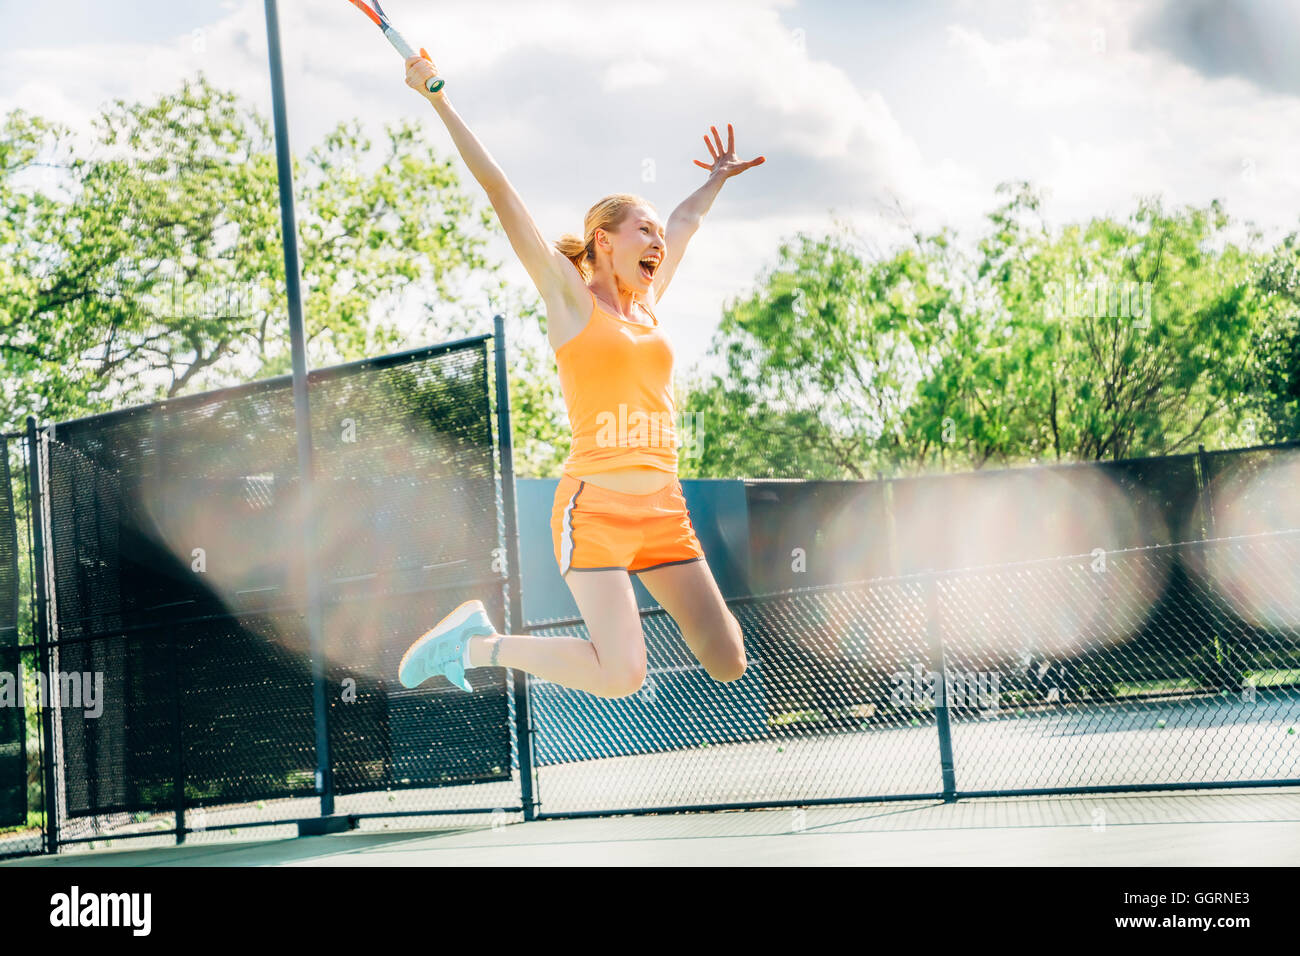 Caucasian woman jumping for joy on tennis court Stock Photo